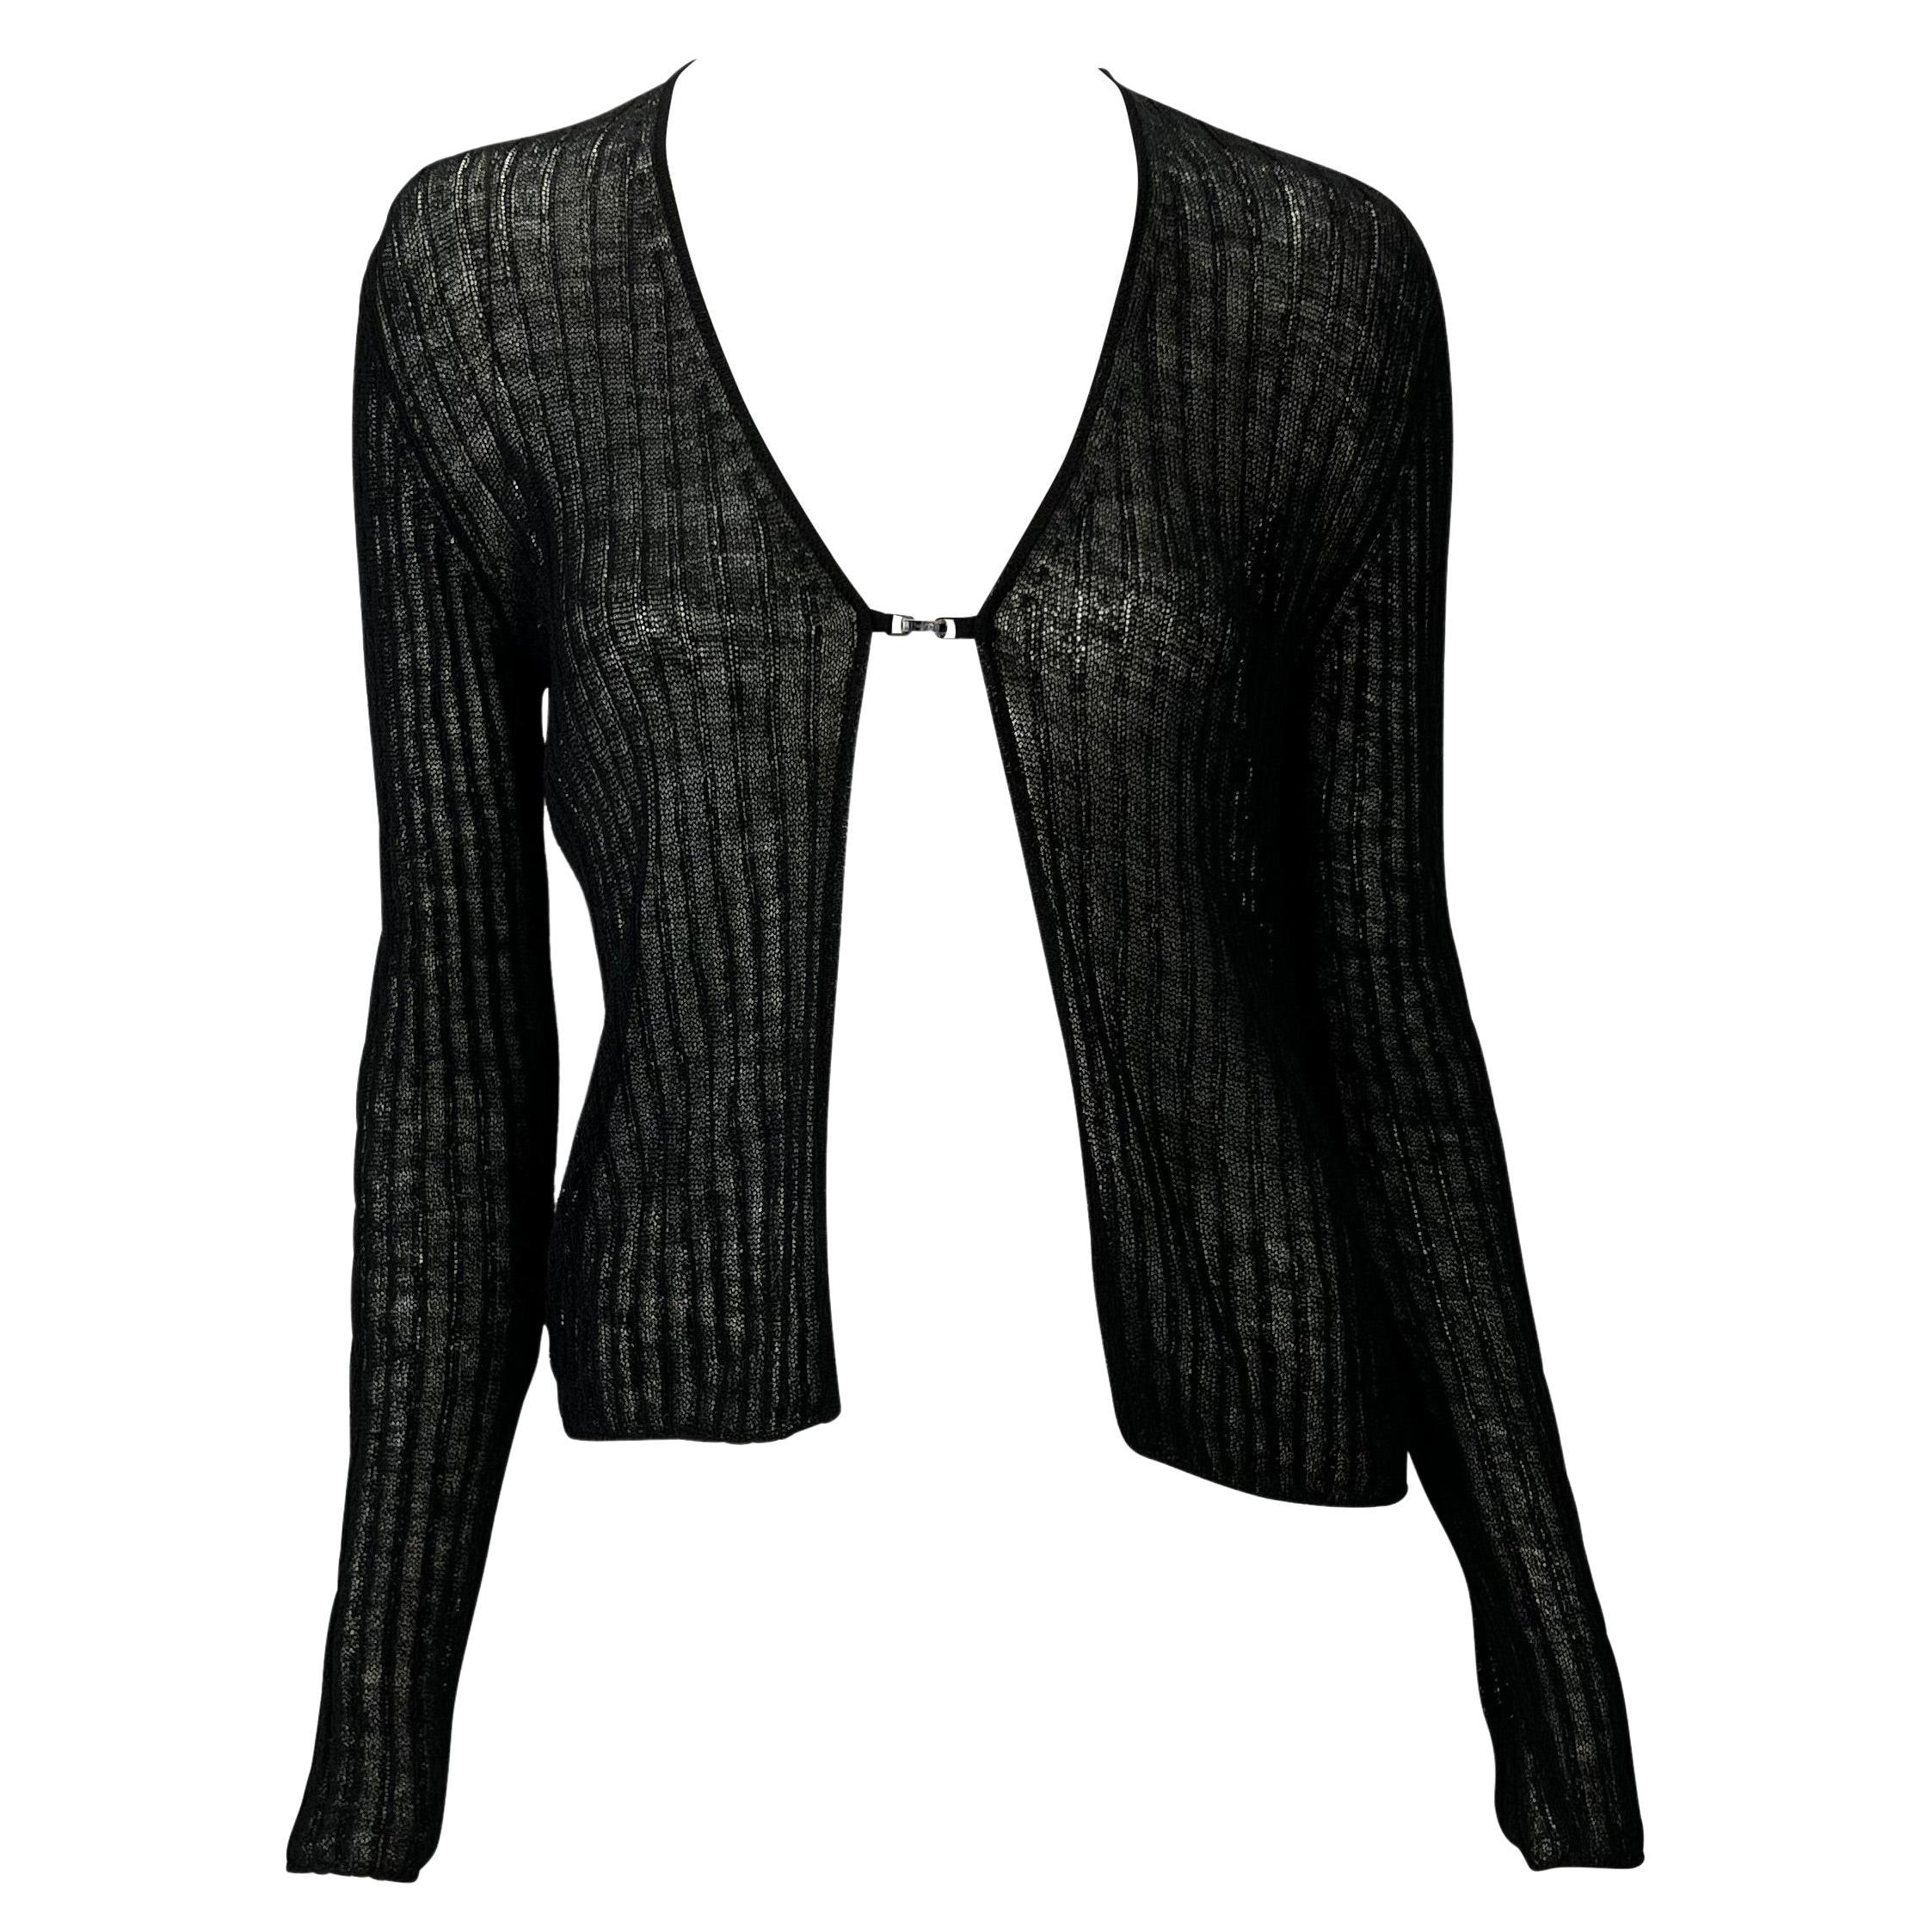 Late 1990s Gucci by Tom Ford Black Logo Buckle Sheer Black Knit Cardigan Top